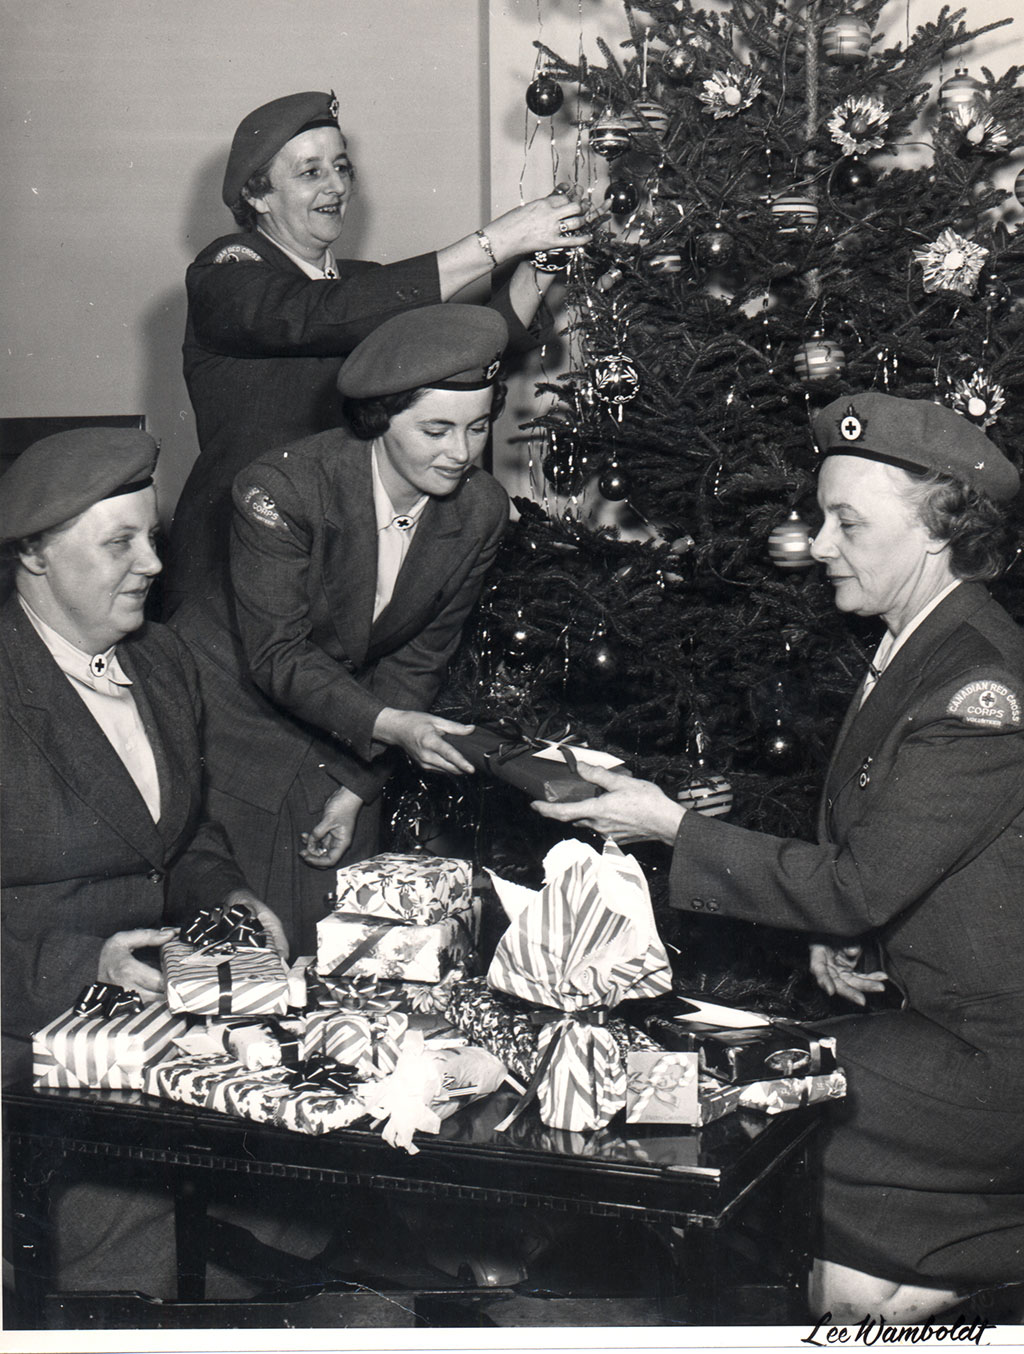 Women in uniforms decorate a Christmas tree and wrap gifts.